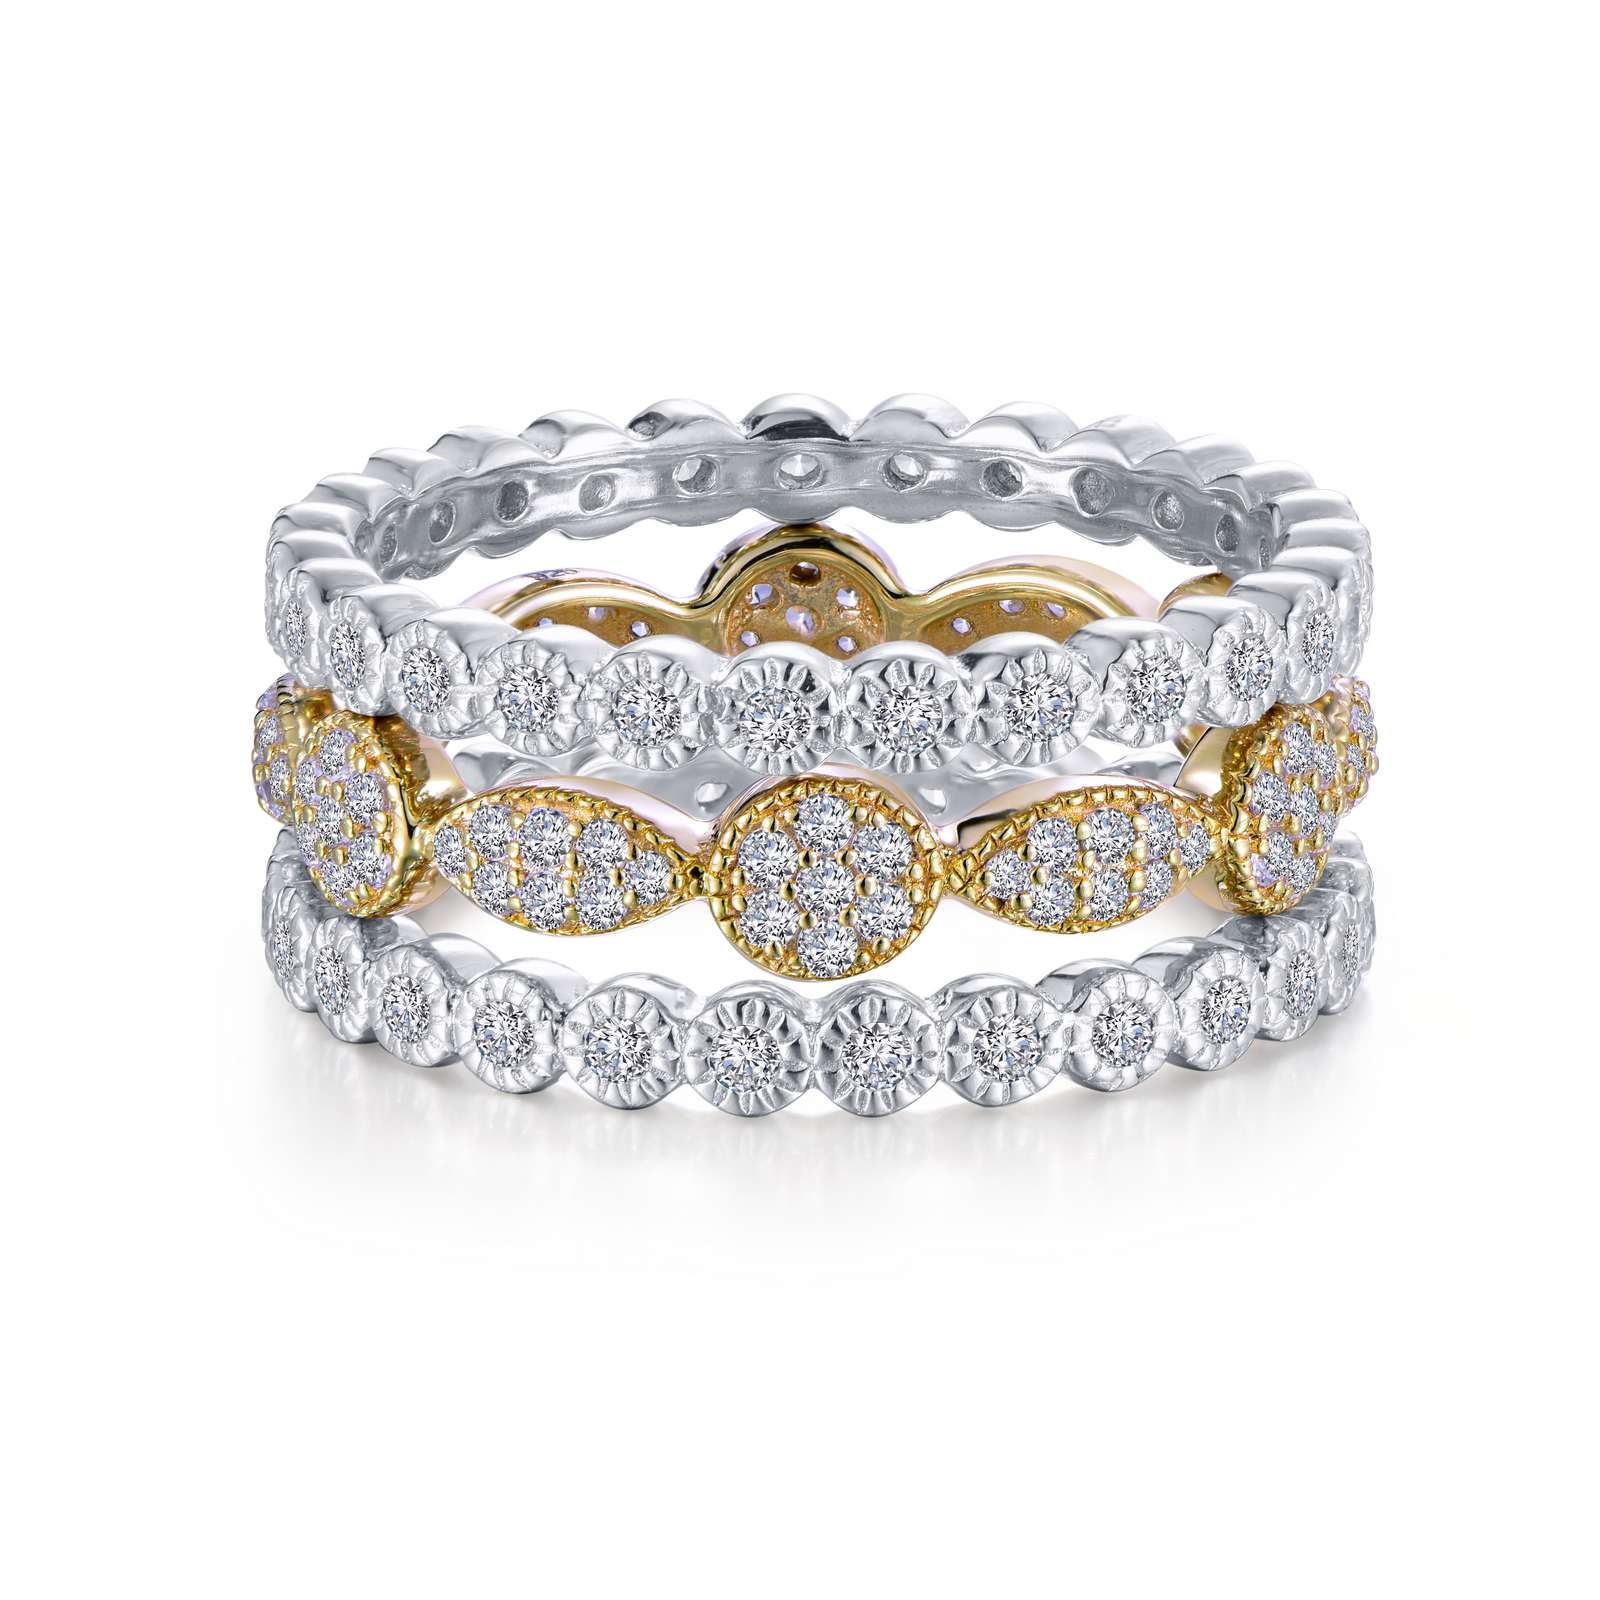 3-Piece Eternity Ring Set Griner Jewelry Co. Moultrie, GA